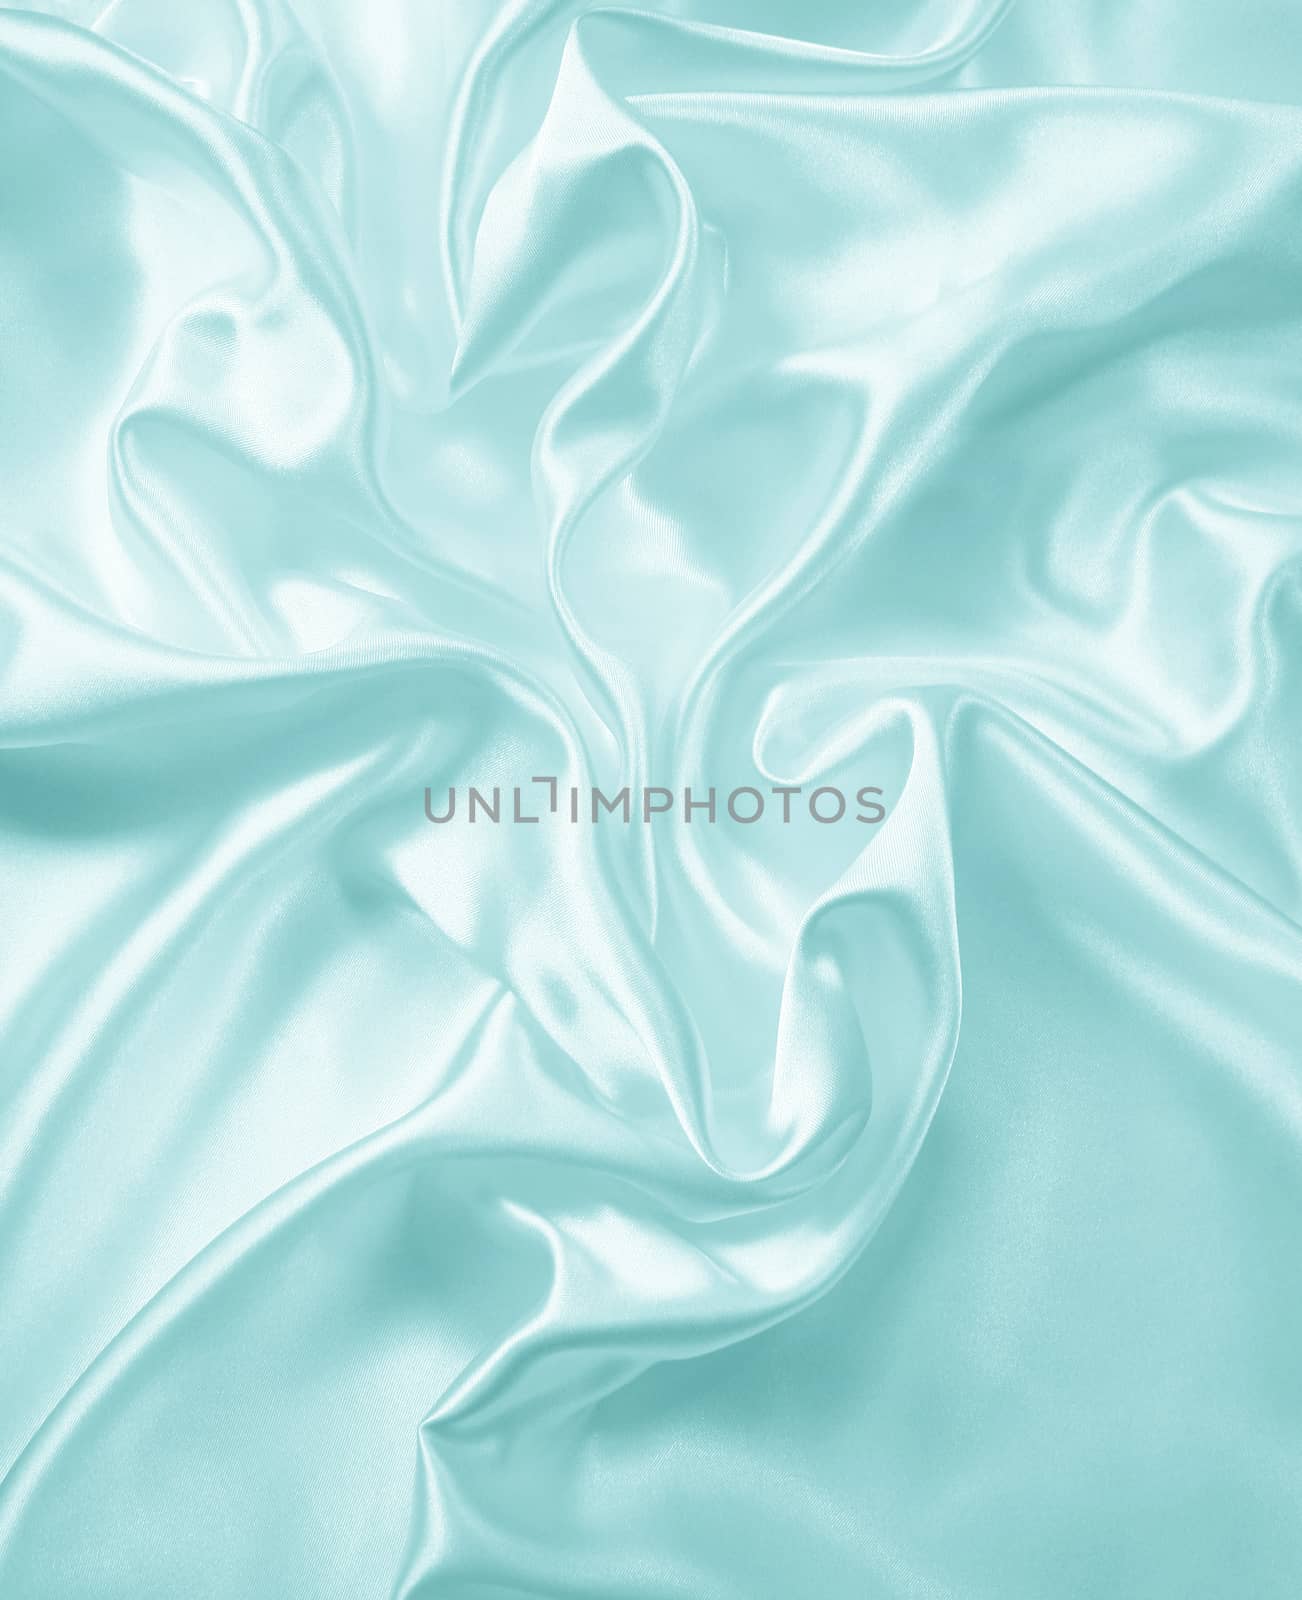 Smooth elegant blue silk or satin texture can use as background 